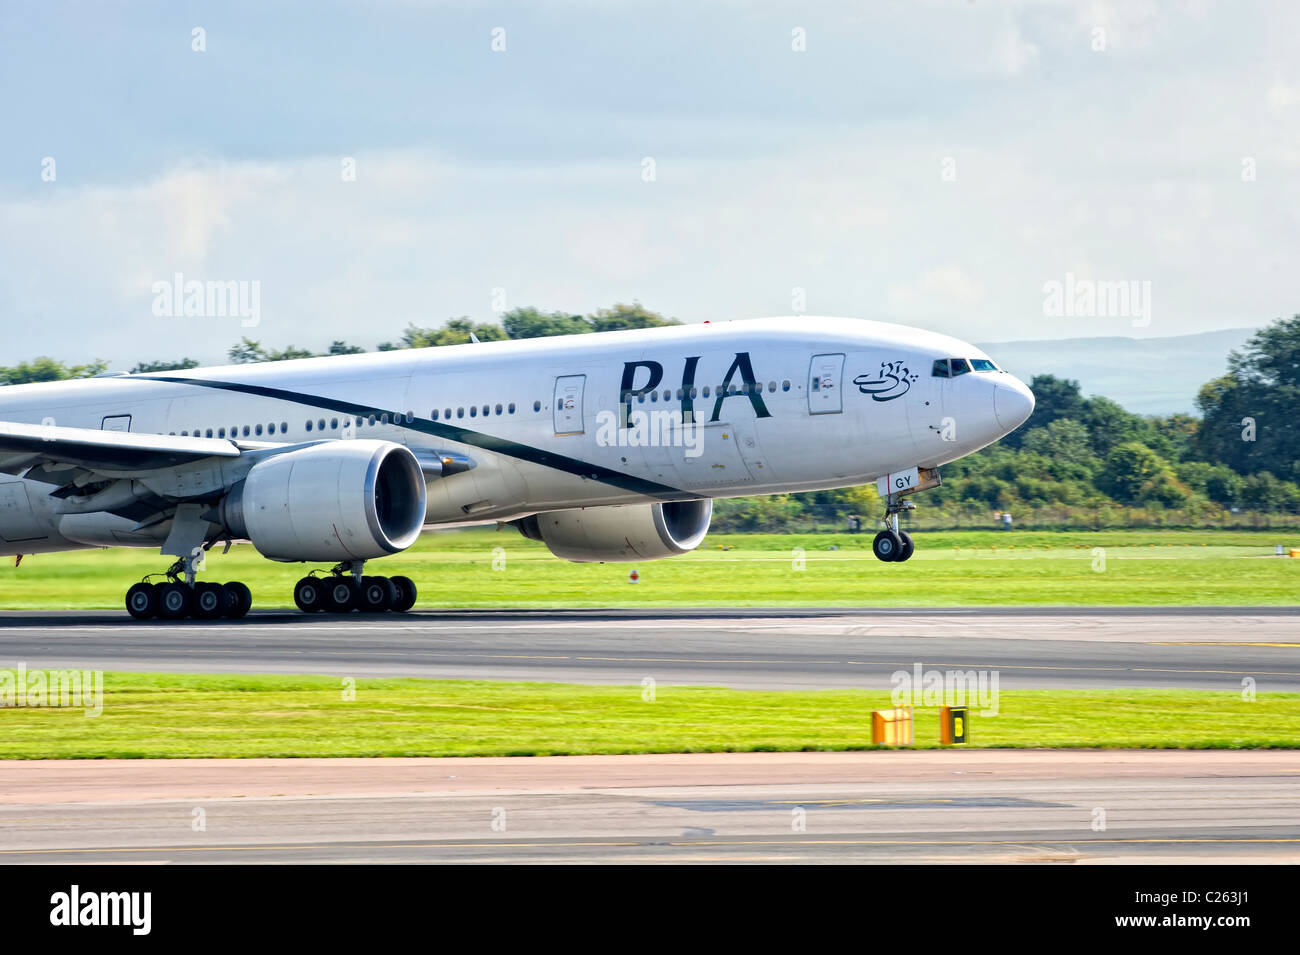 Pakistan International Airways (PIA) aircraft taking off from Manchester Airport Stock Photo